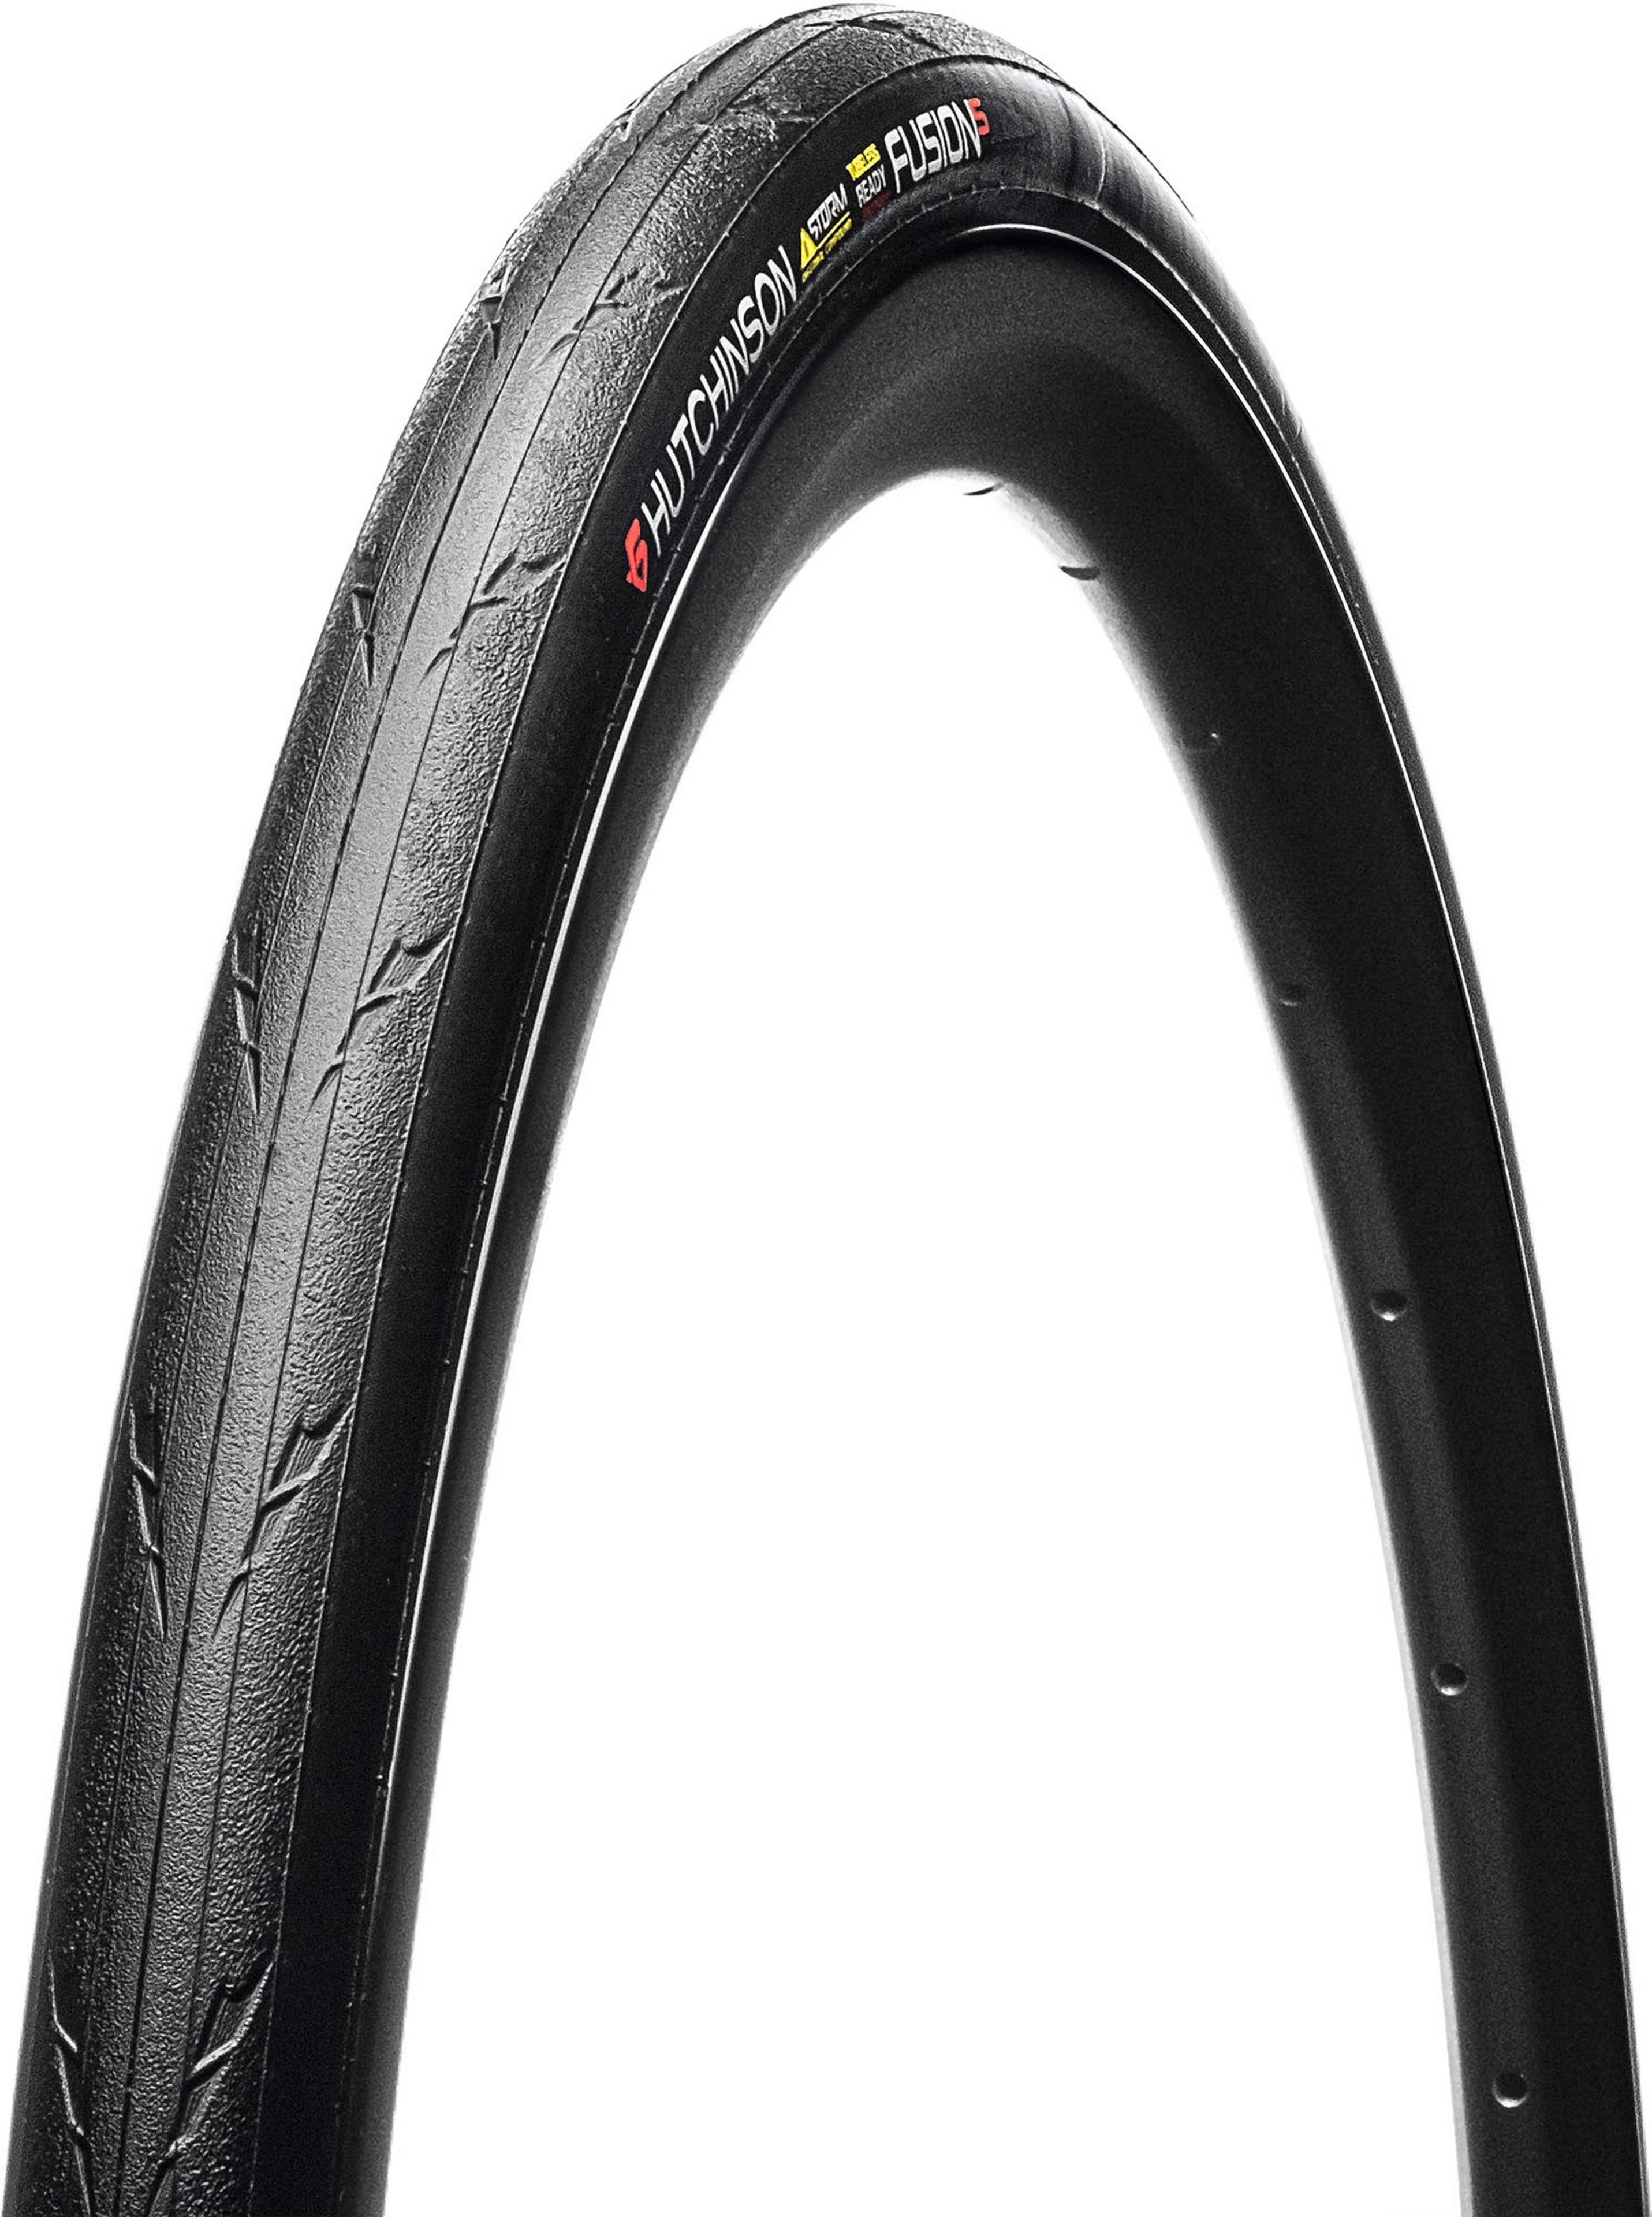 Hutchinson Fusion 5 TLR Performance 11Storm Road Tyre